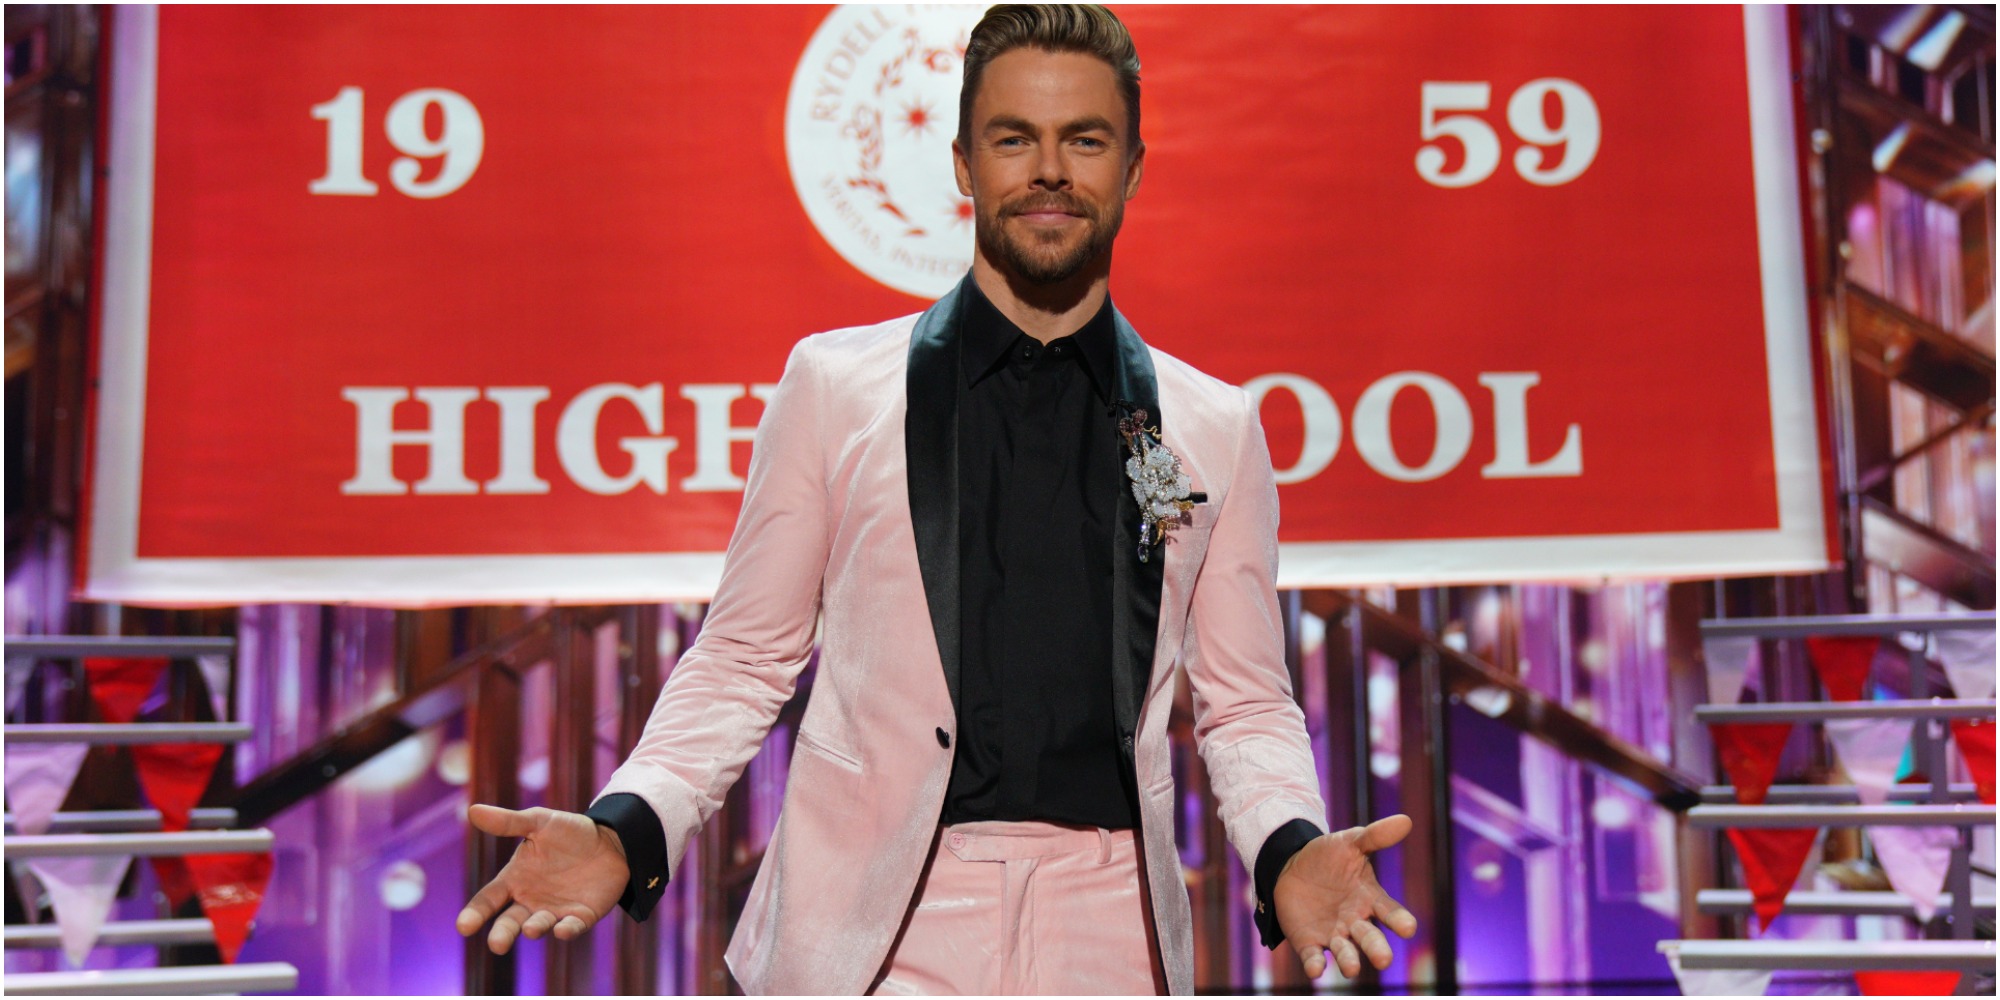 Derek Hough on the set of "Dancing with the Stars" season 30.